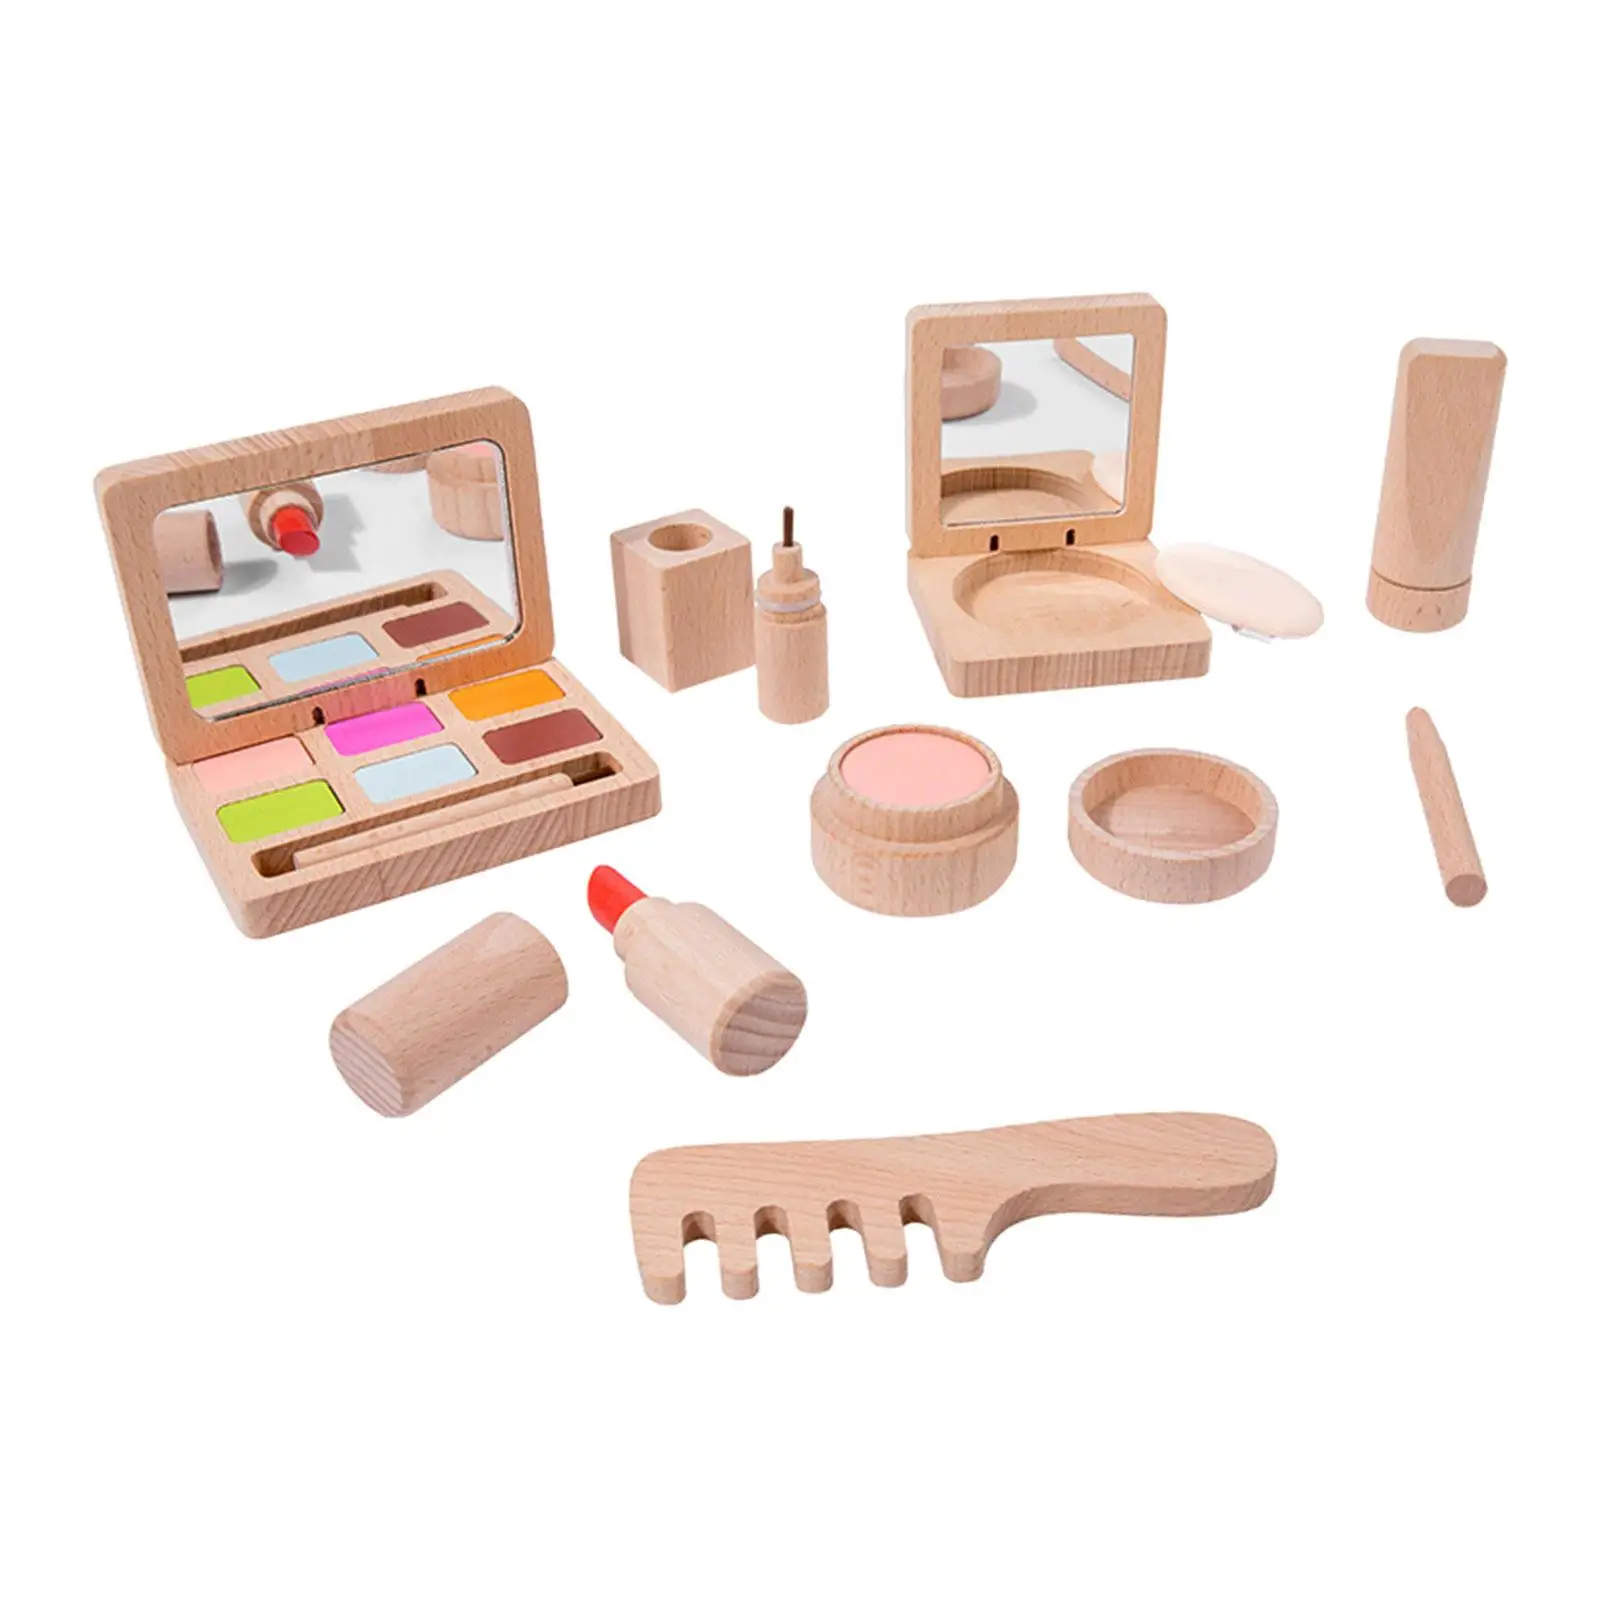 Makeup Toy Kits for Girls Role Playing Cosmetic Toy Kits Wooden Makeup Toys for Princess Dress up Birthday Toys Gift Age 3 4 5+